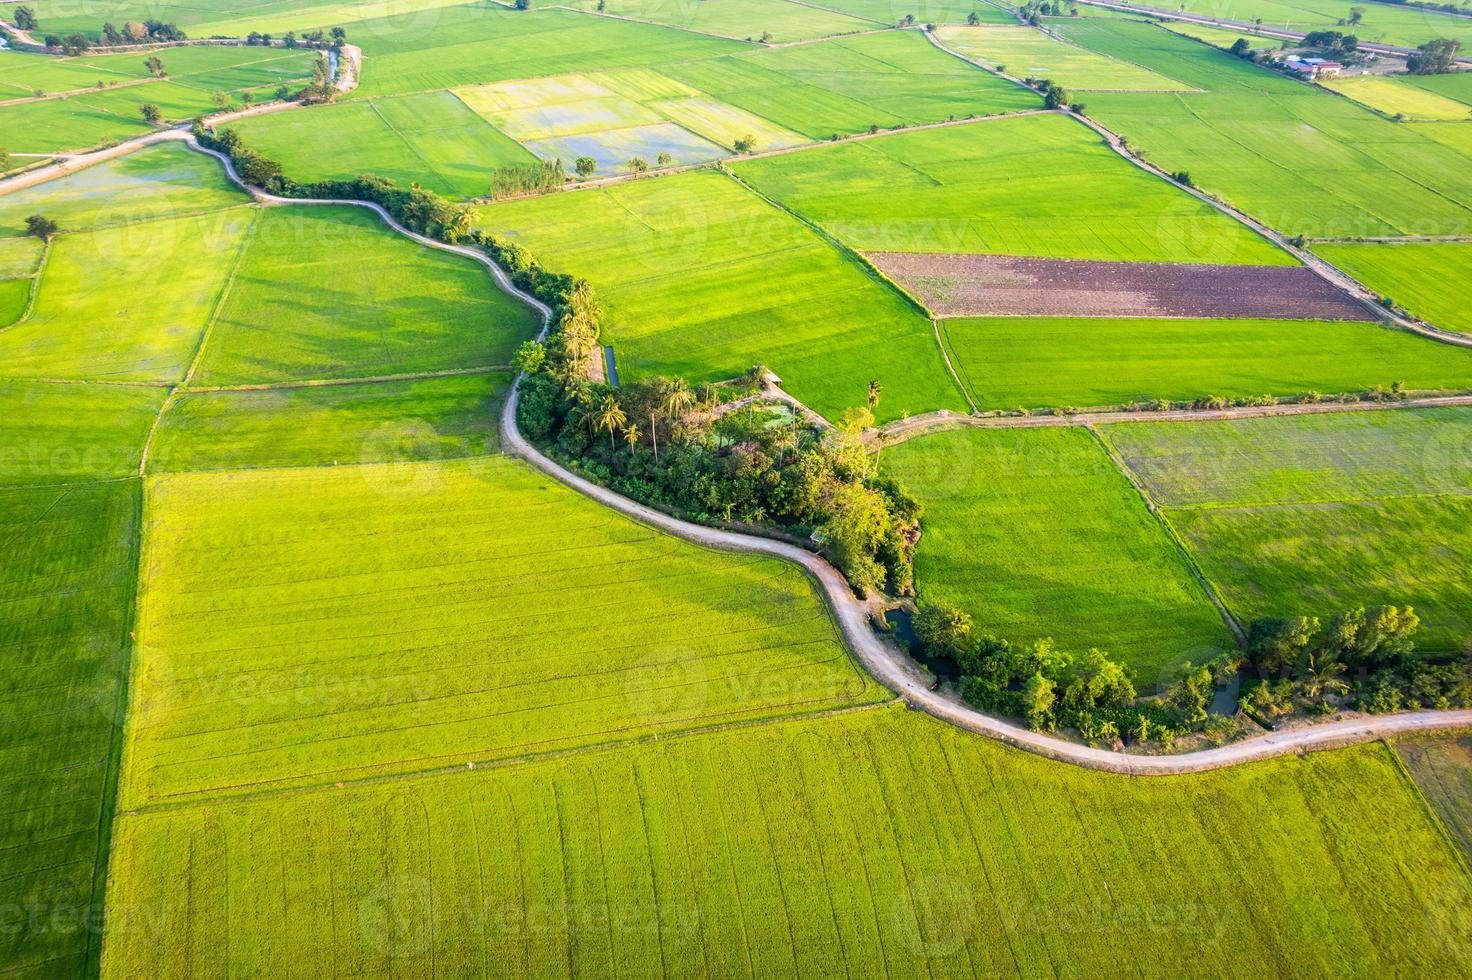 Aerial view of Green rice paddy field, farming cultivation in agricultural land at countryside photo